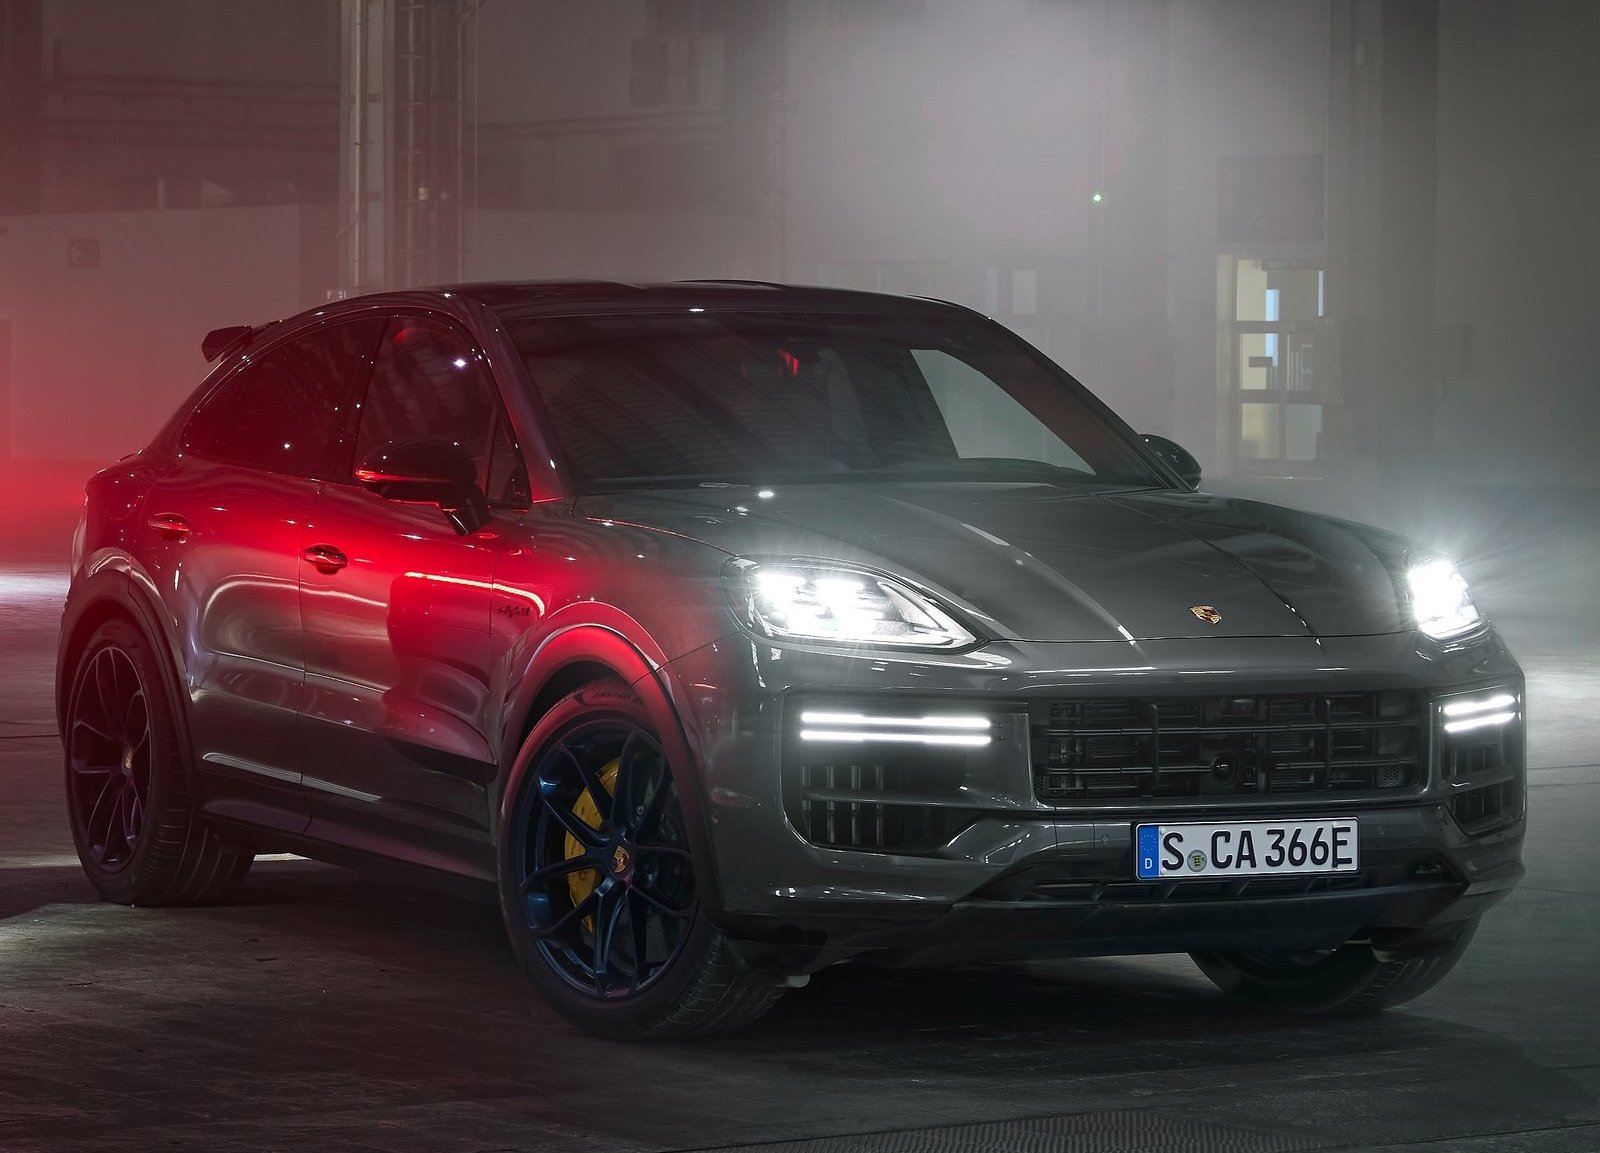 New Porsche Cayenne Turbo E-Hybrid Launches with 544kW/950Nm